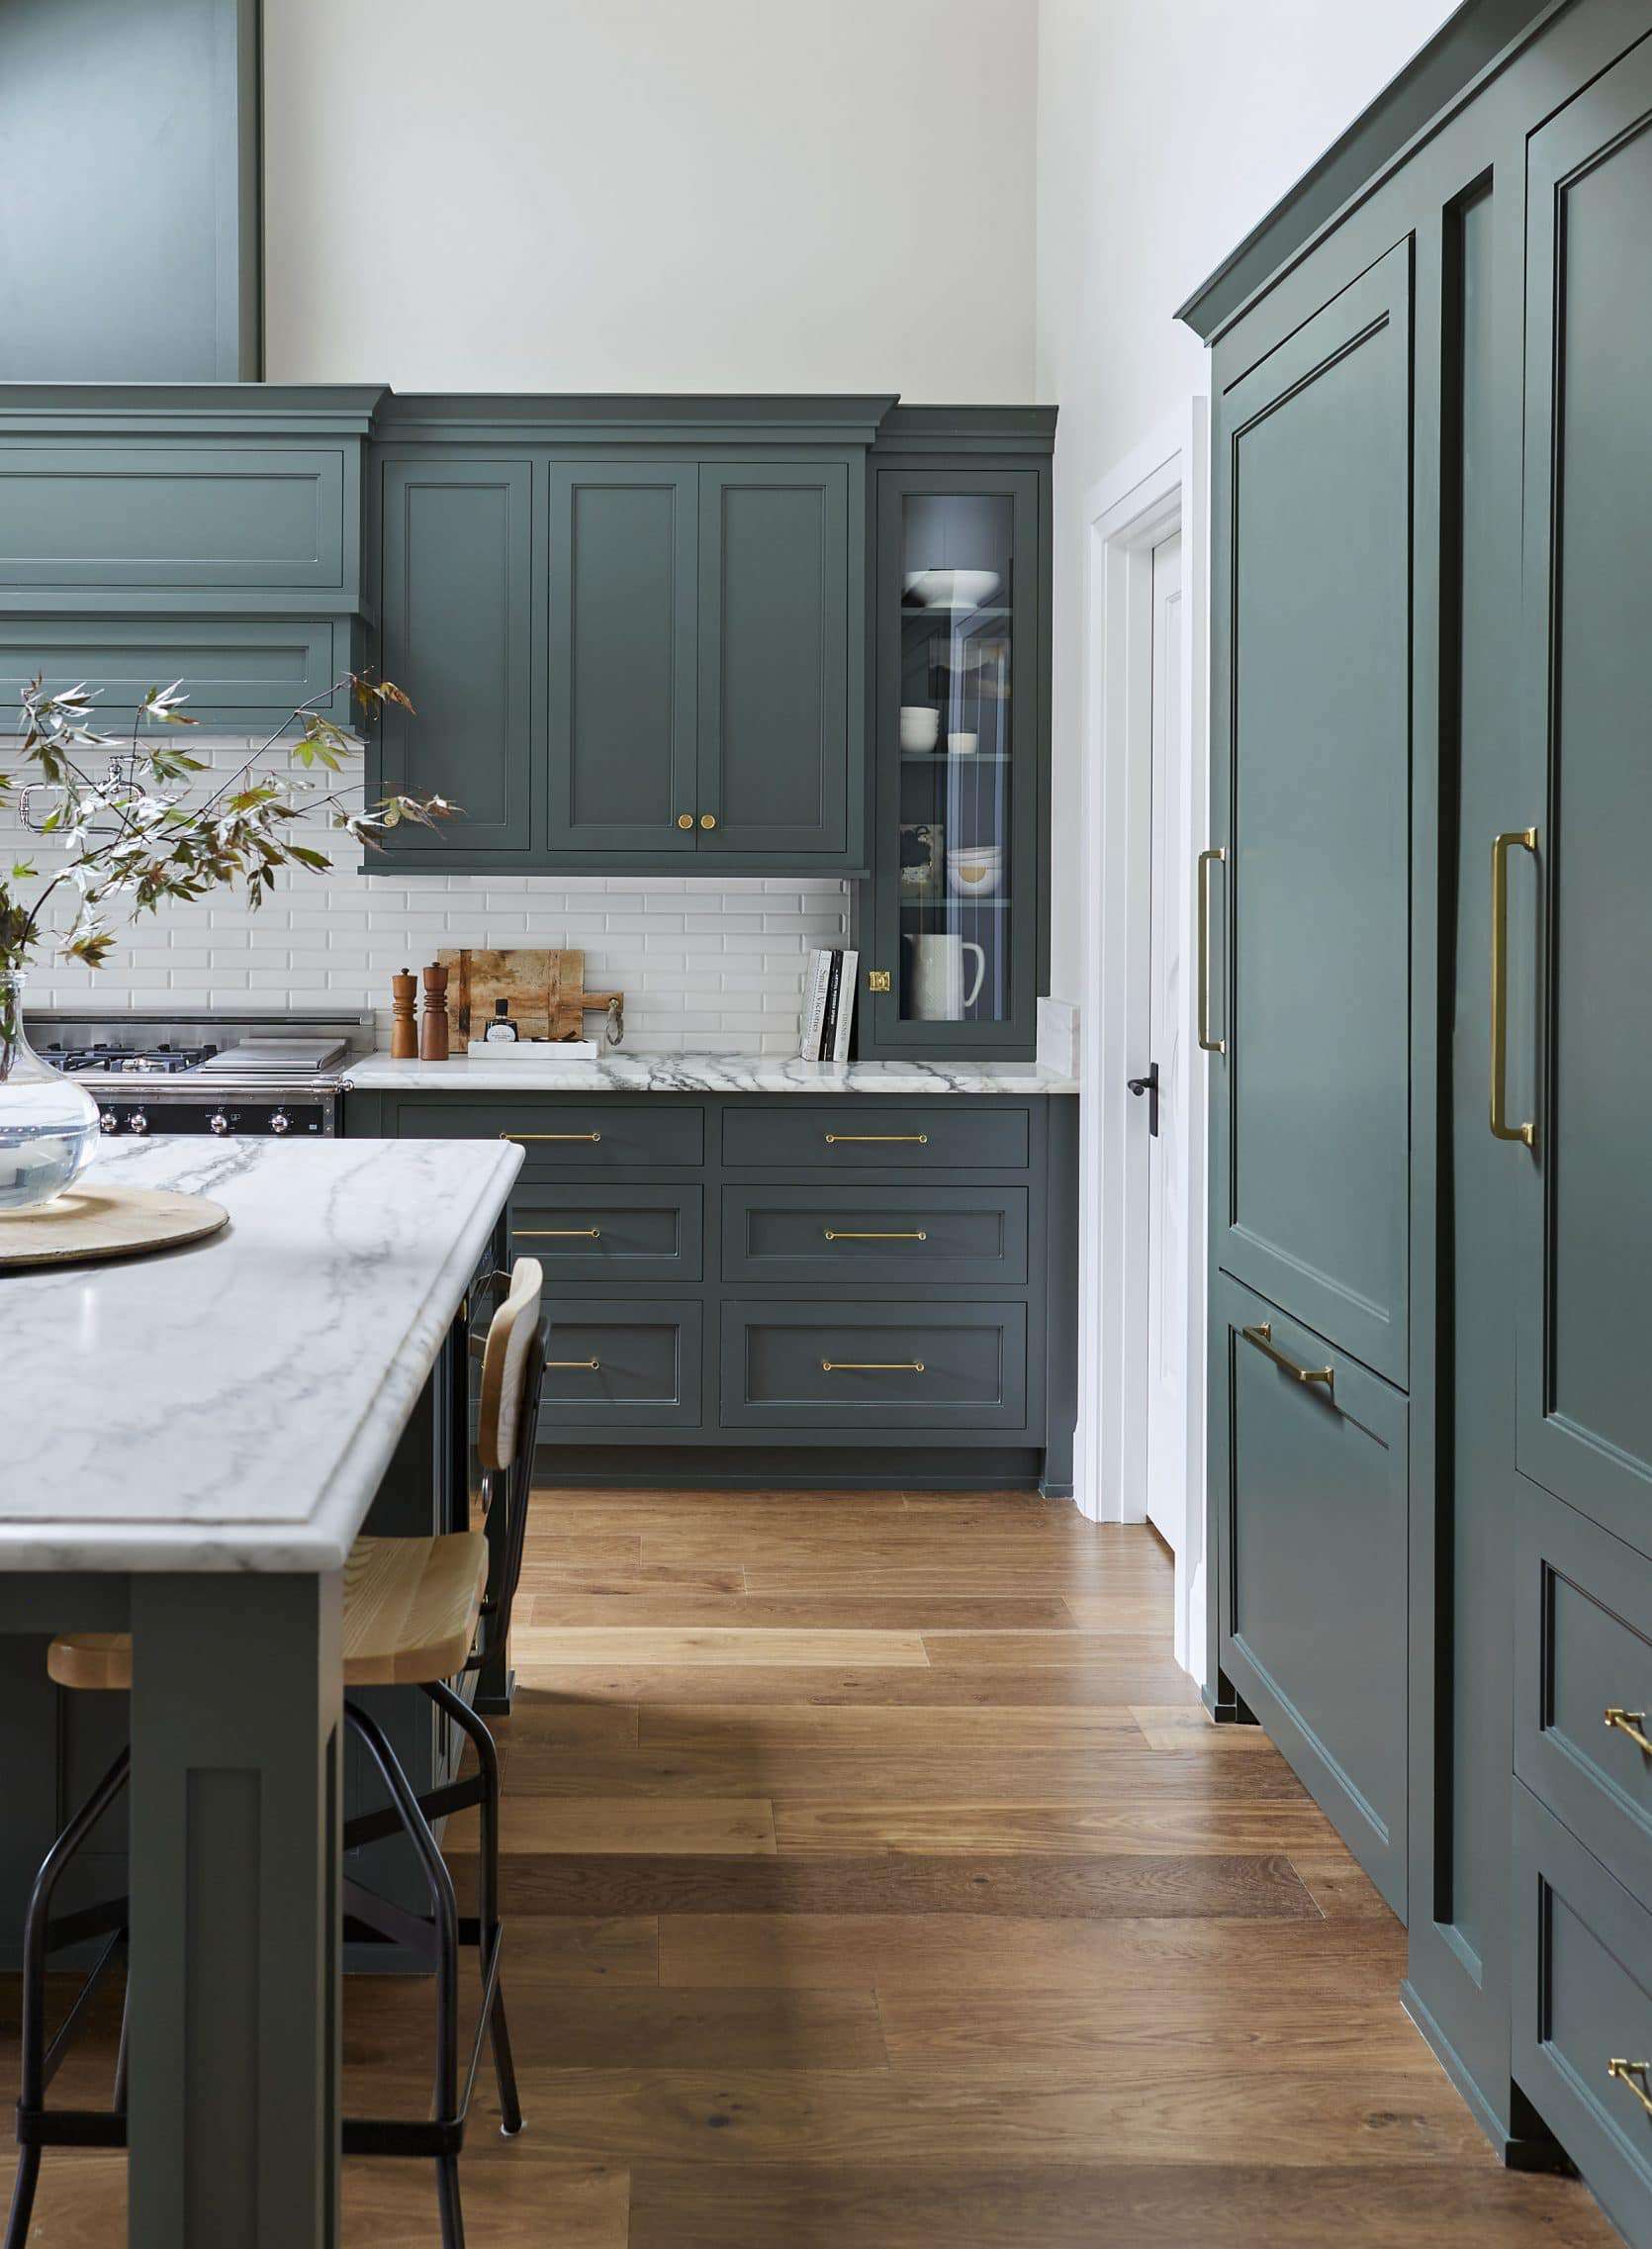 Gorgeous kitchen with Pewter Green cabinets by Sherwin Williams - Emily Henderson Portland Kitchen Design Home